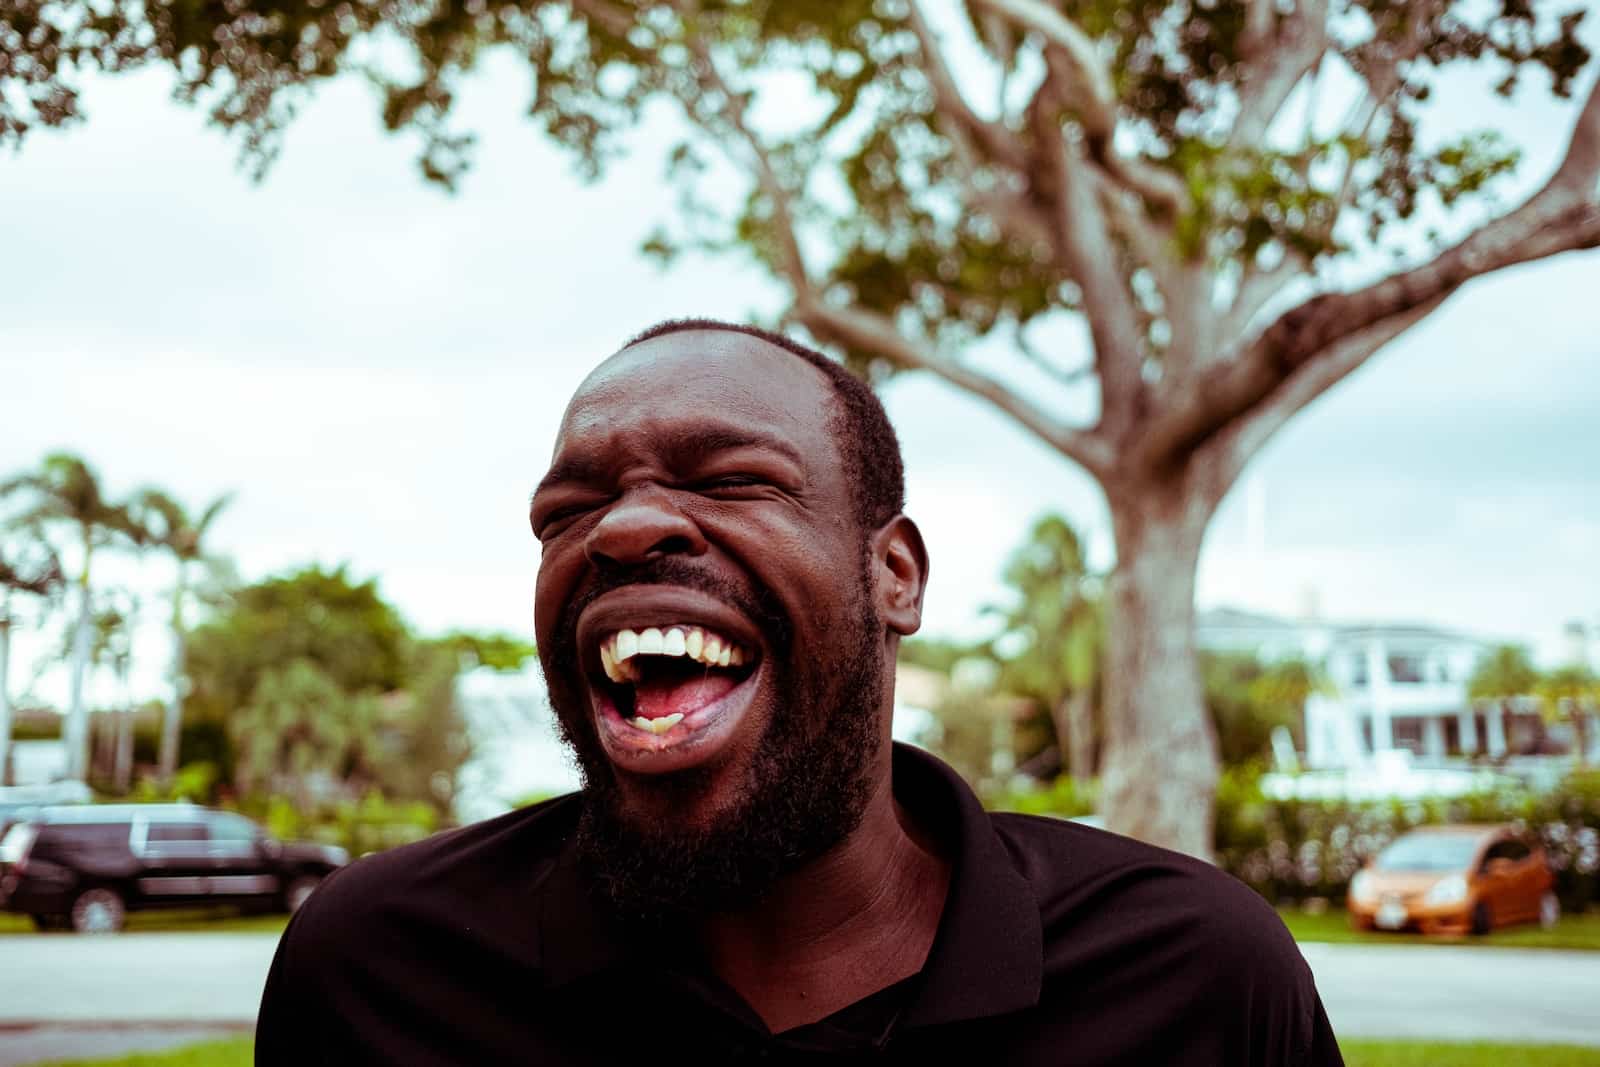 Laughing Your Way to Stress Relief: How Daily Laughter Can Help You Cope with Life’s Struggles